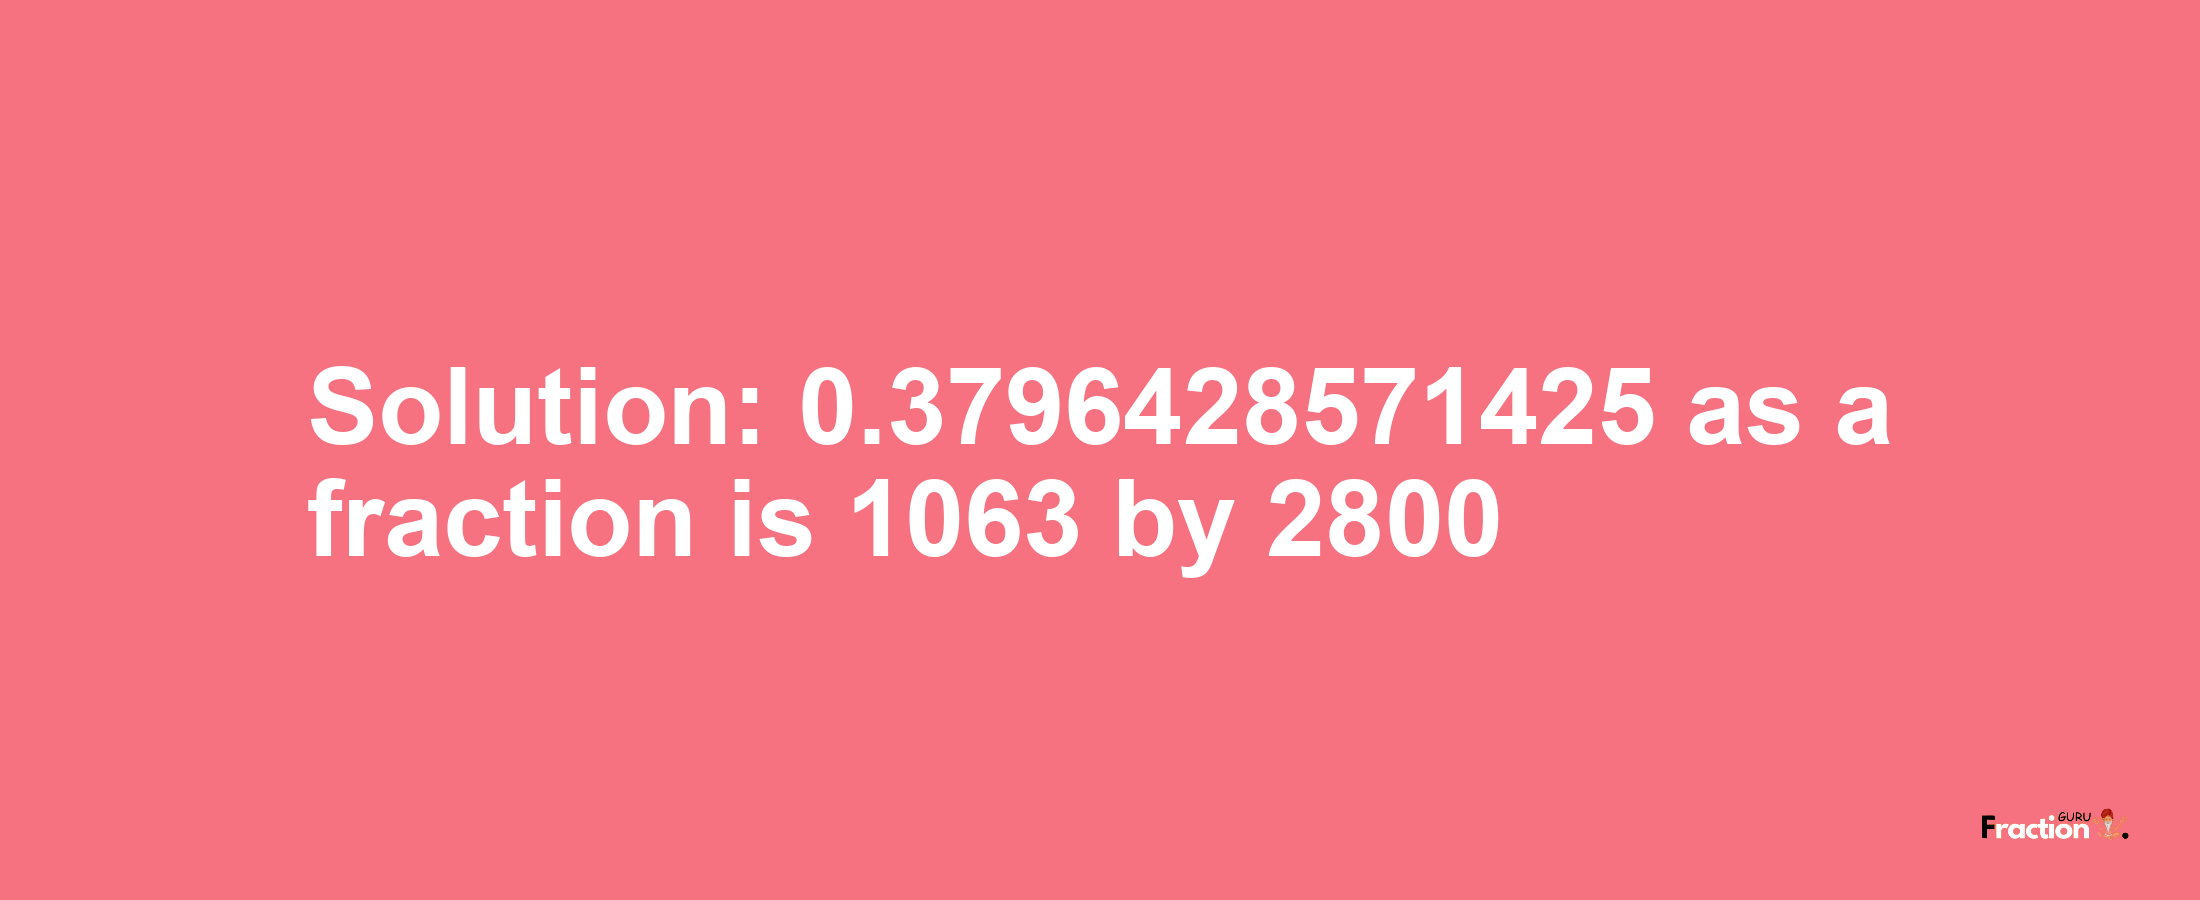 Solution:0.3796428571425 as a fraction is 1063/2800